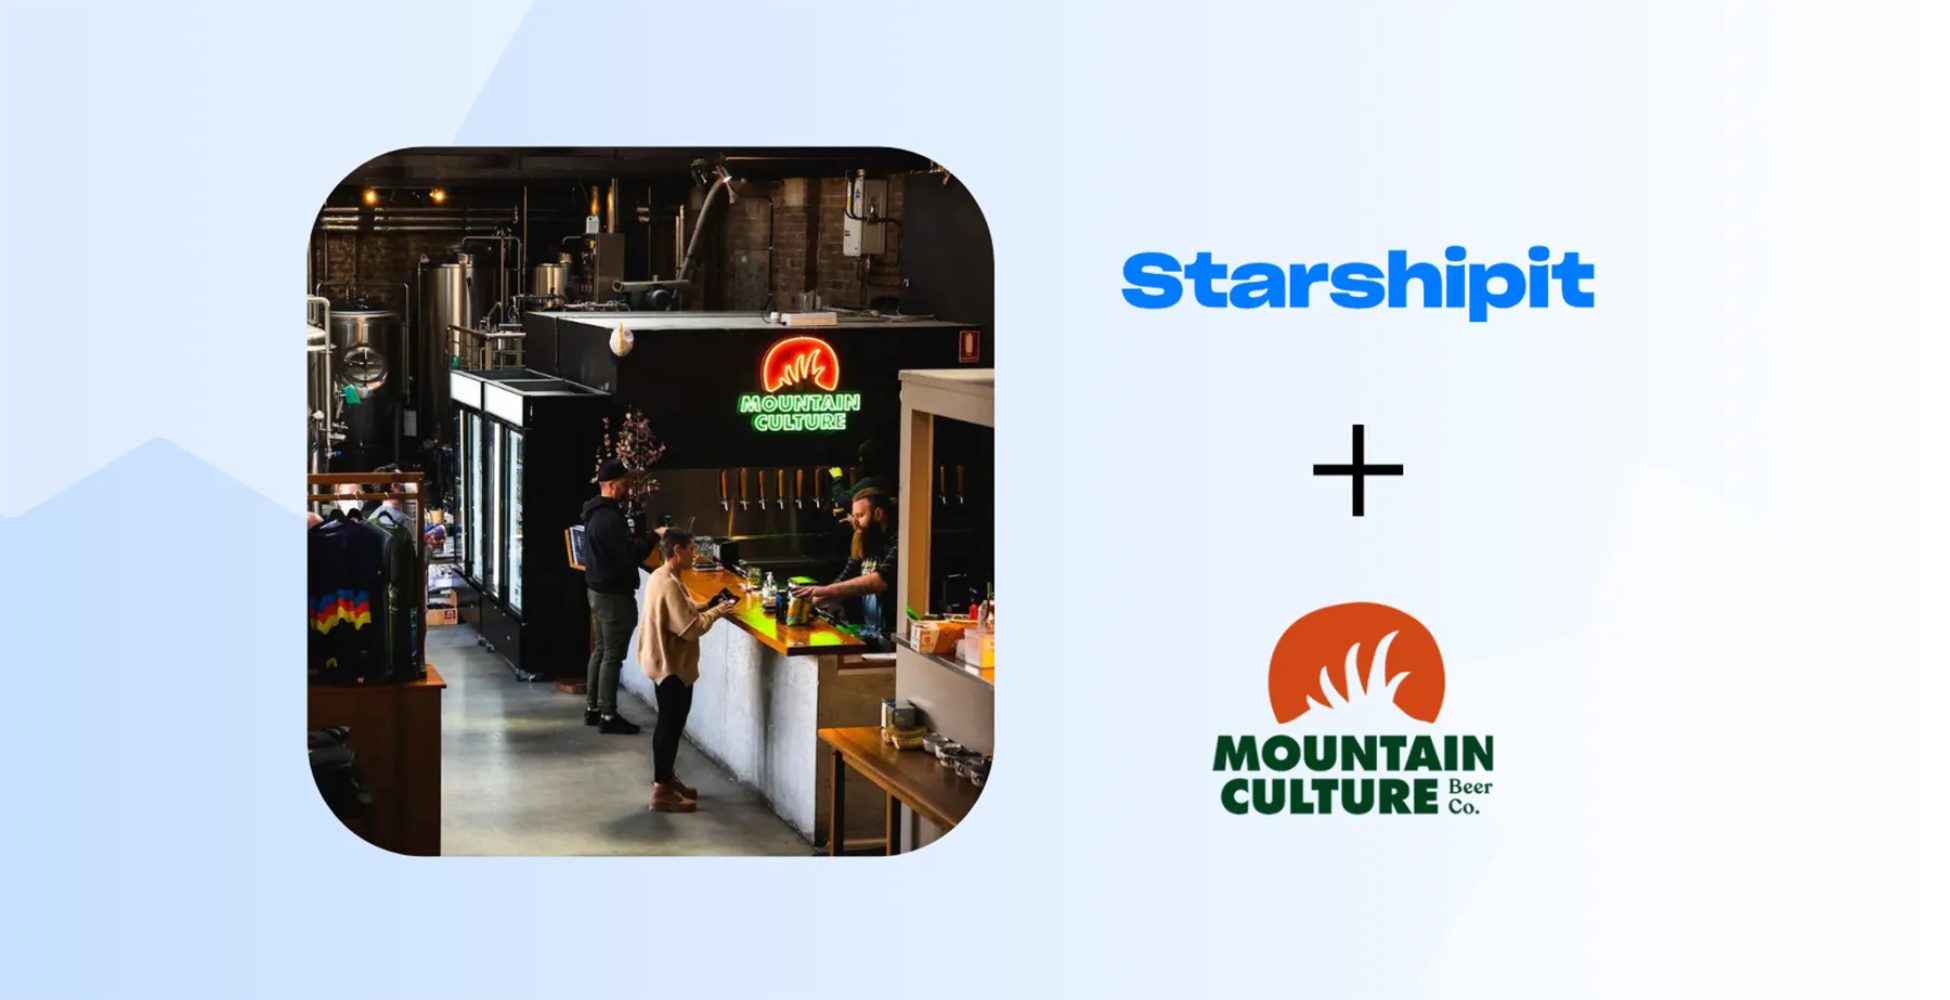 Starshipit and Mountain Culture case study